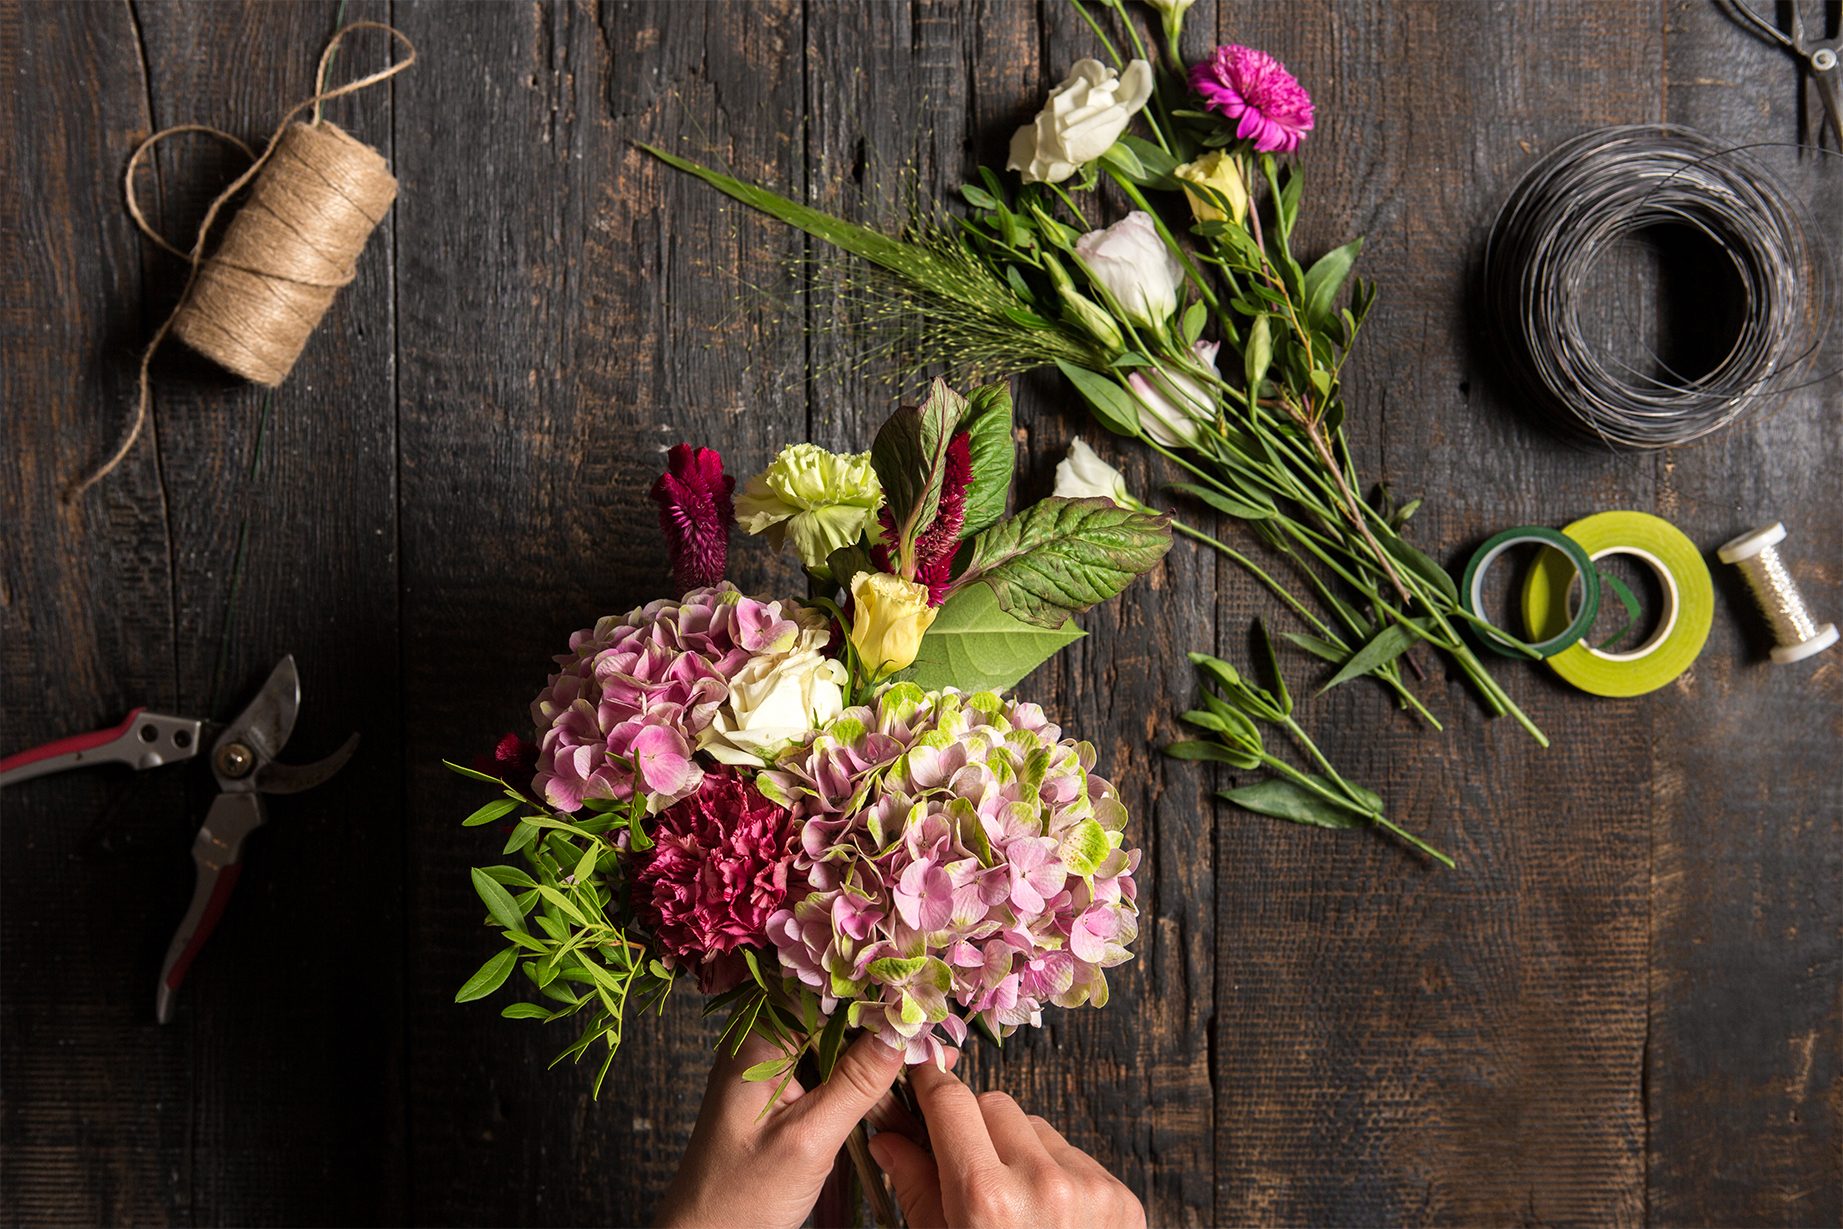 Floral Frogs are the cheap secret to perfect flower arrangements